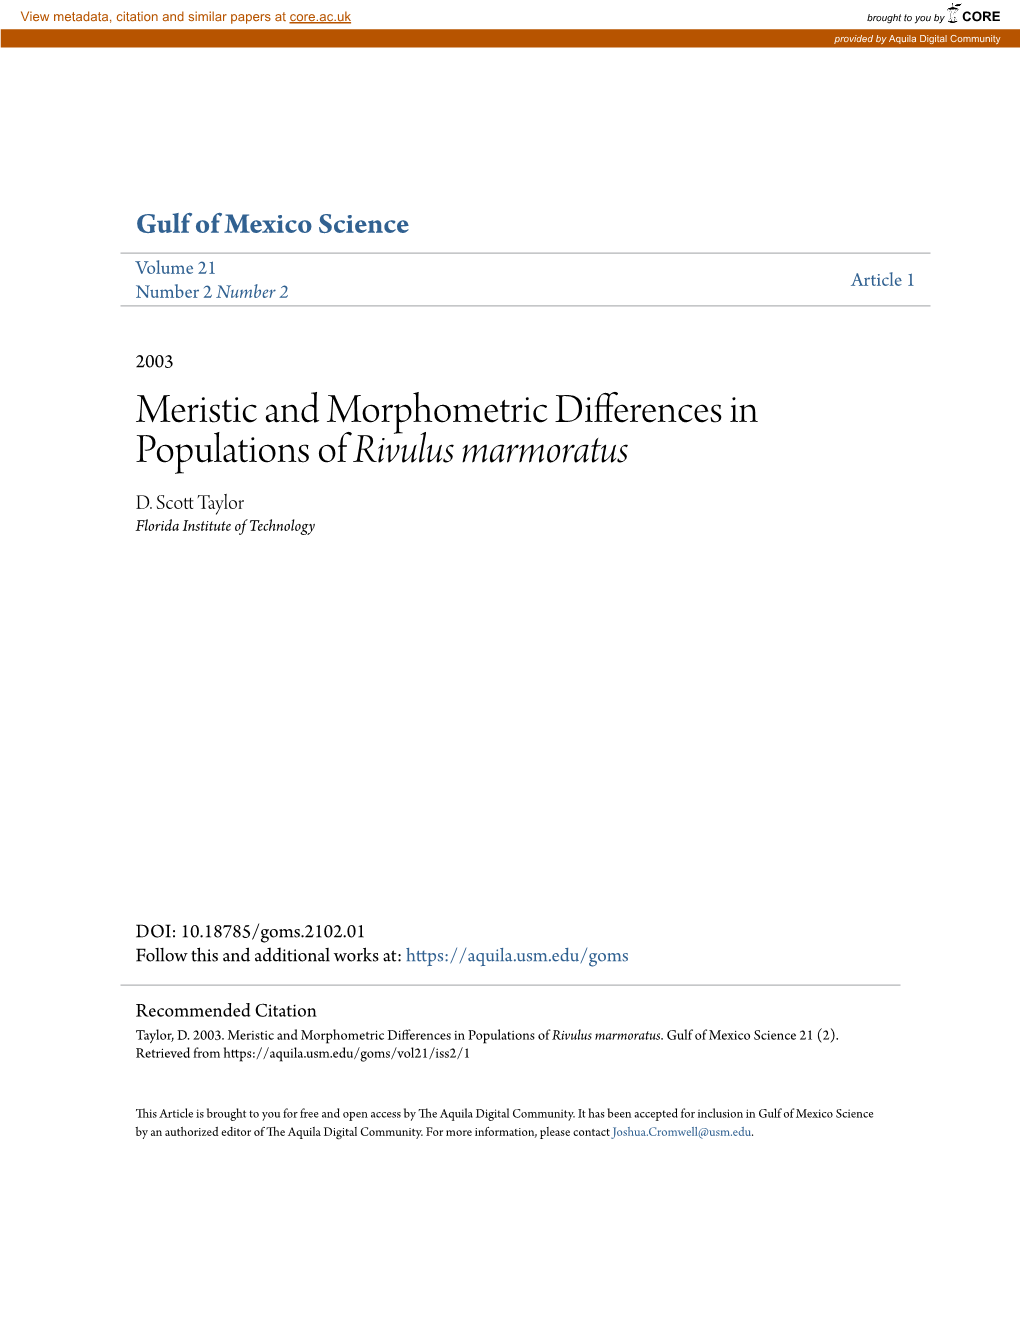 Meristic and Morphometric Differences in Populations of Rivulus Marmoratus D